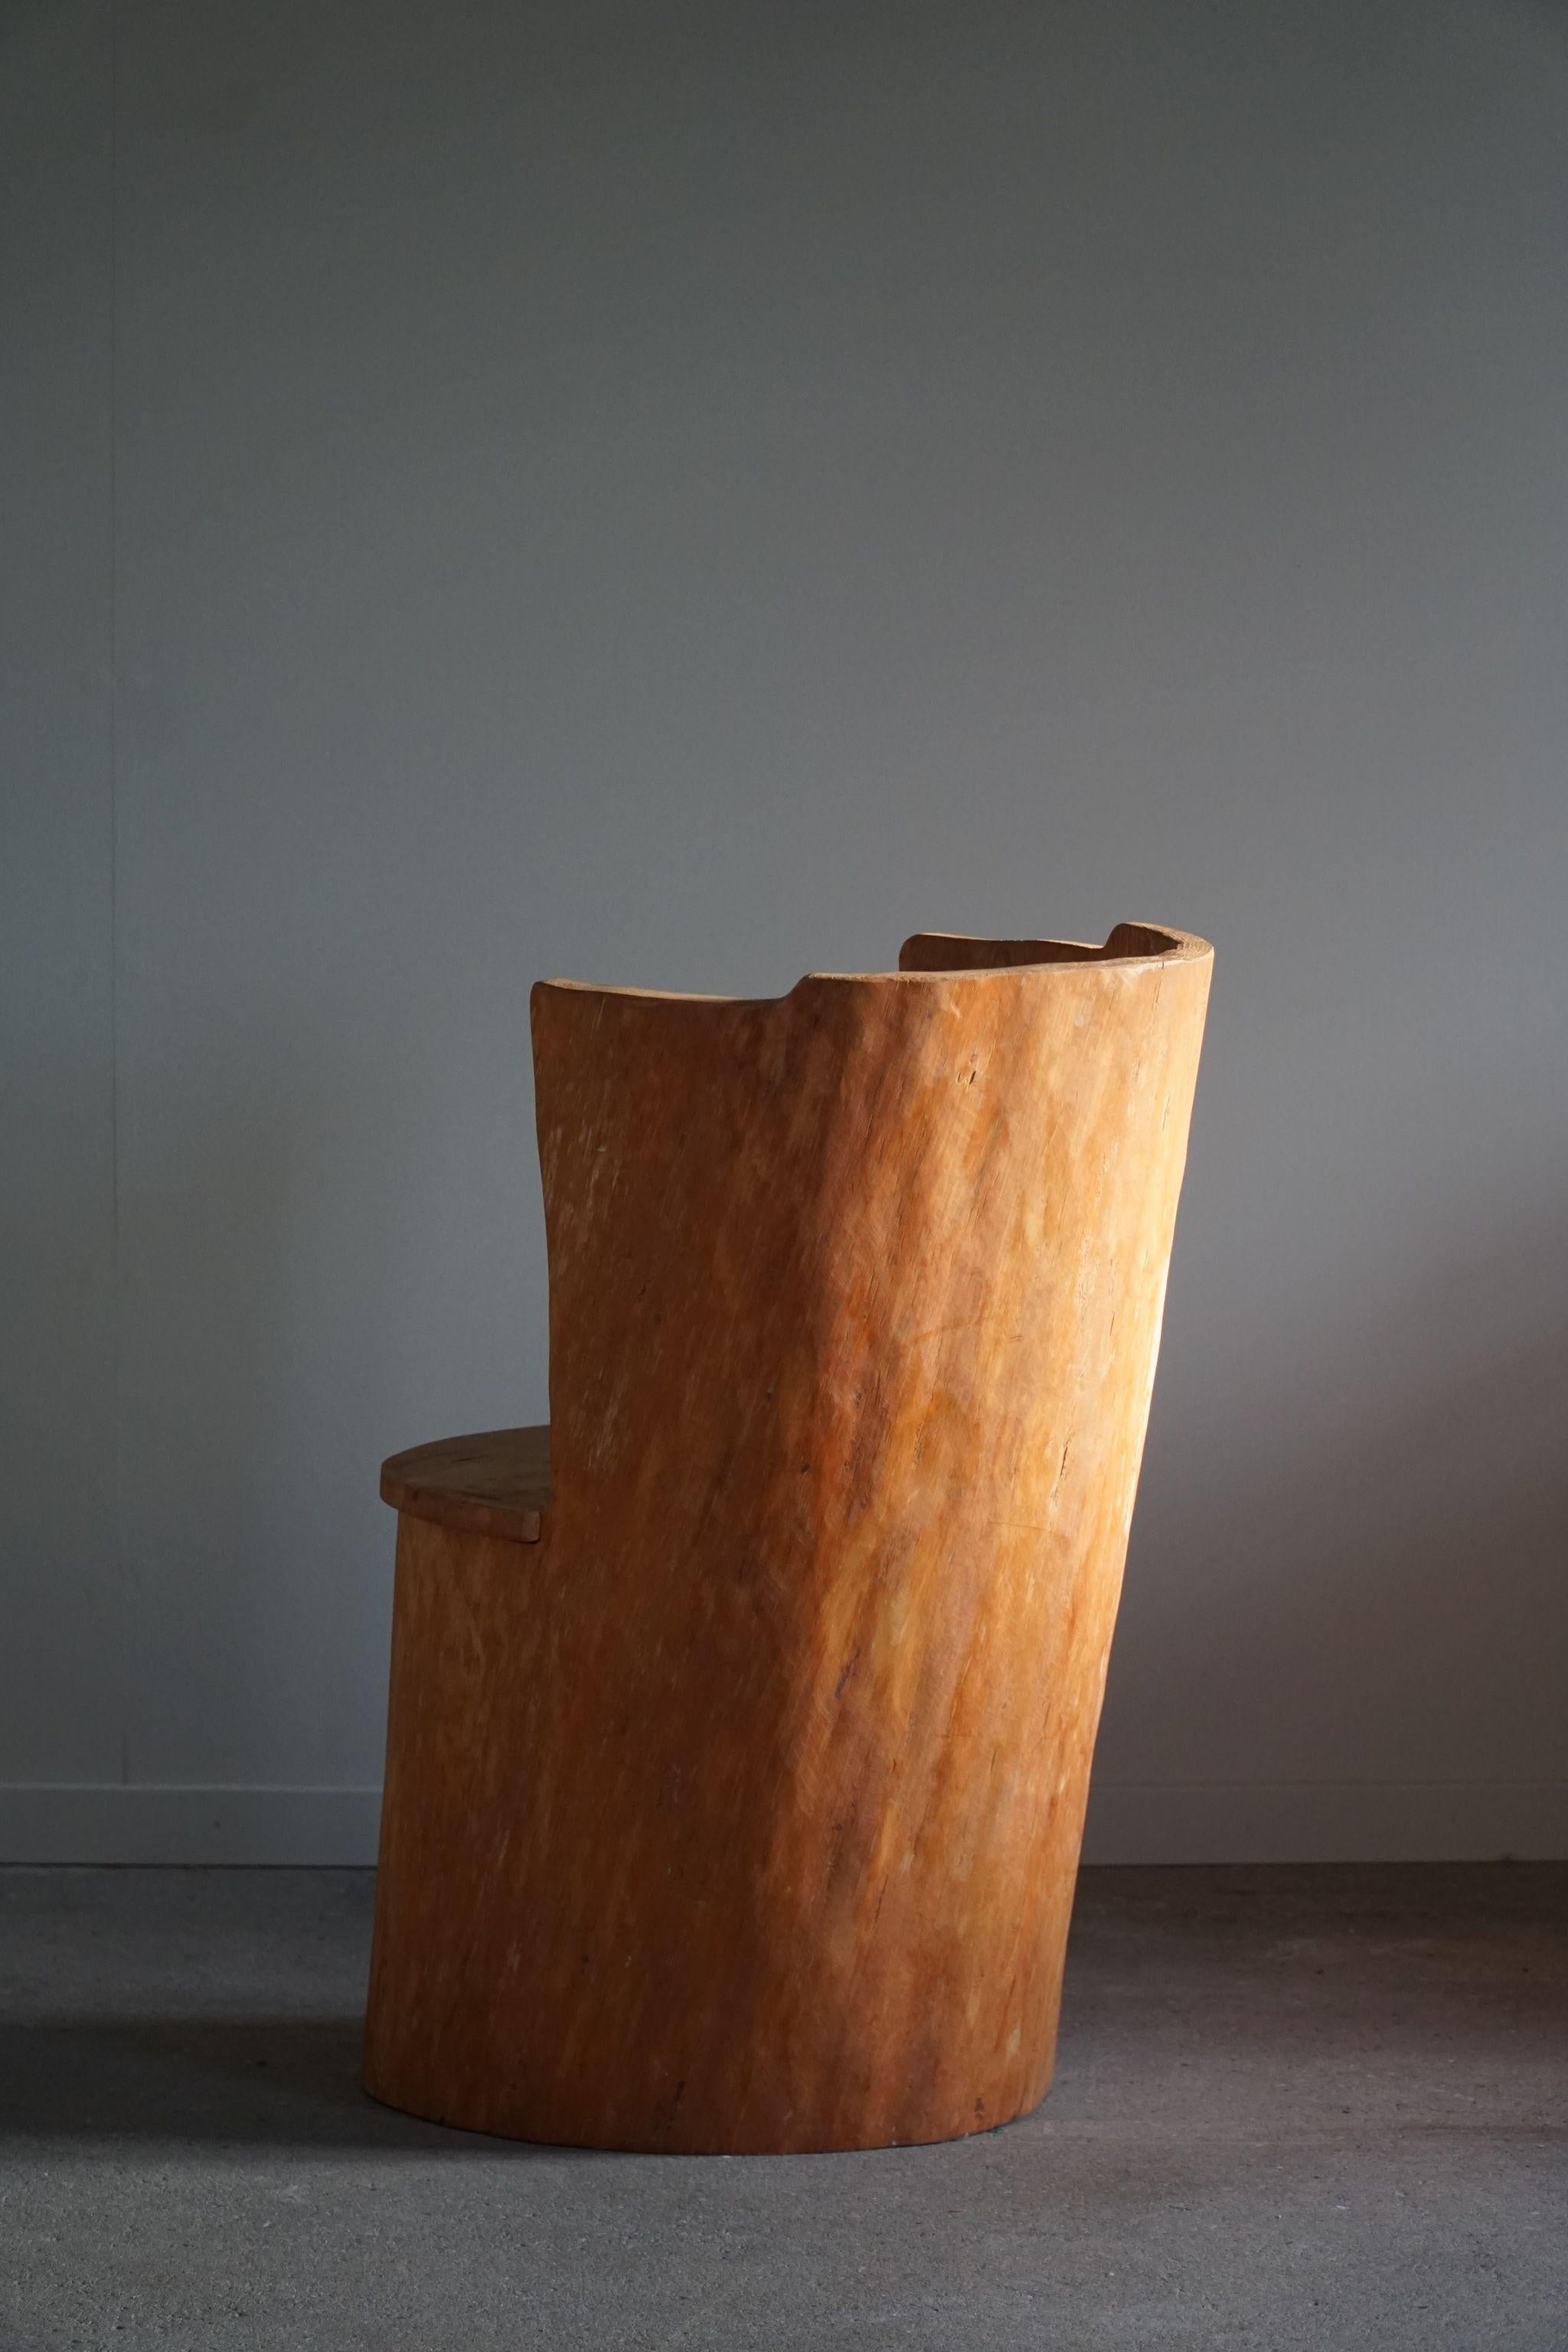 Hand-Carved Wabi Sabi Stump Chair in Solid Pine, by a Swedish Cabinetmaker, Modern - 1960s